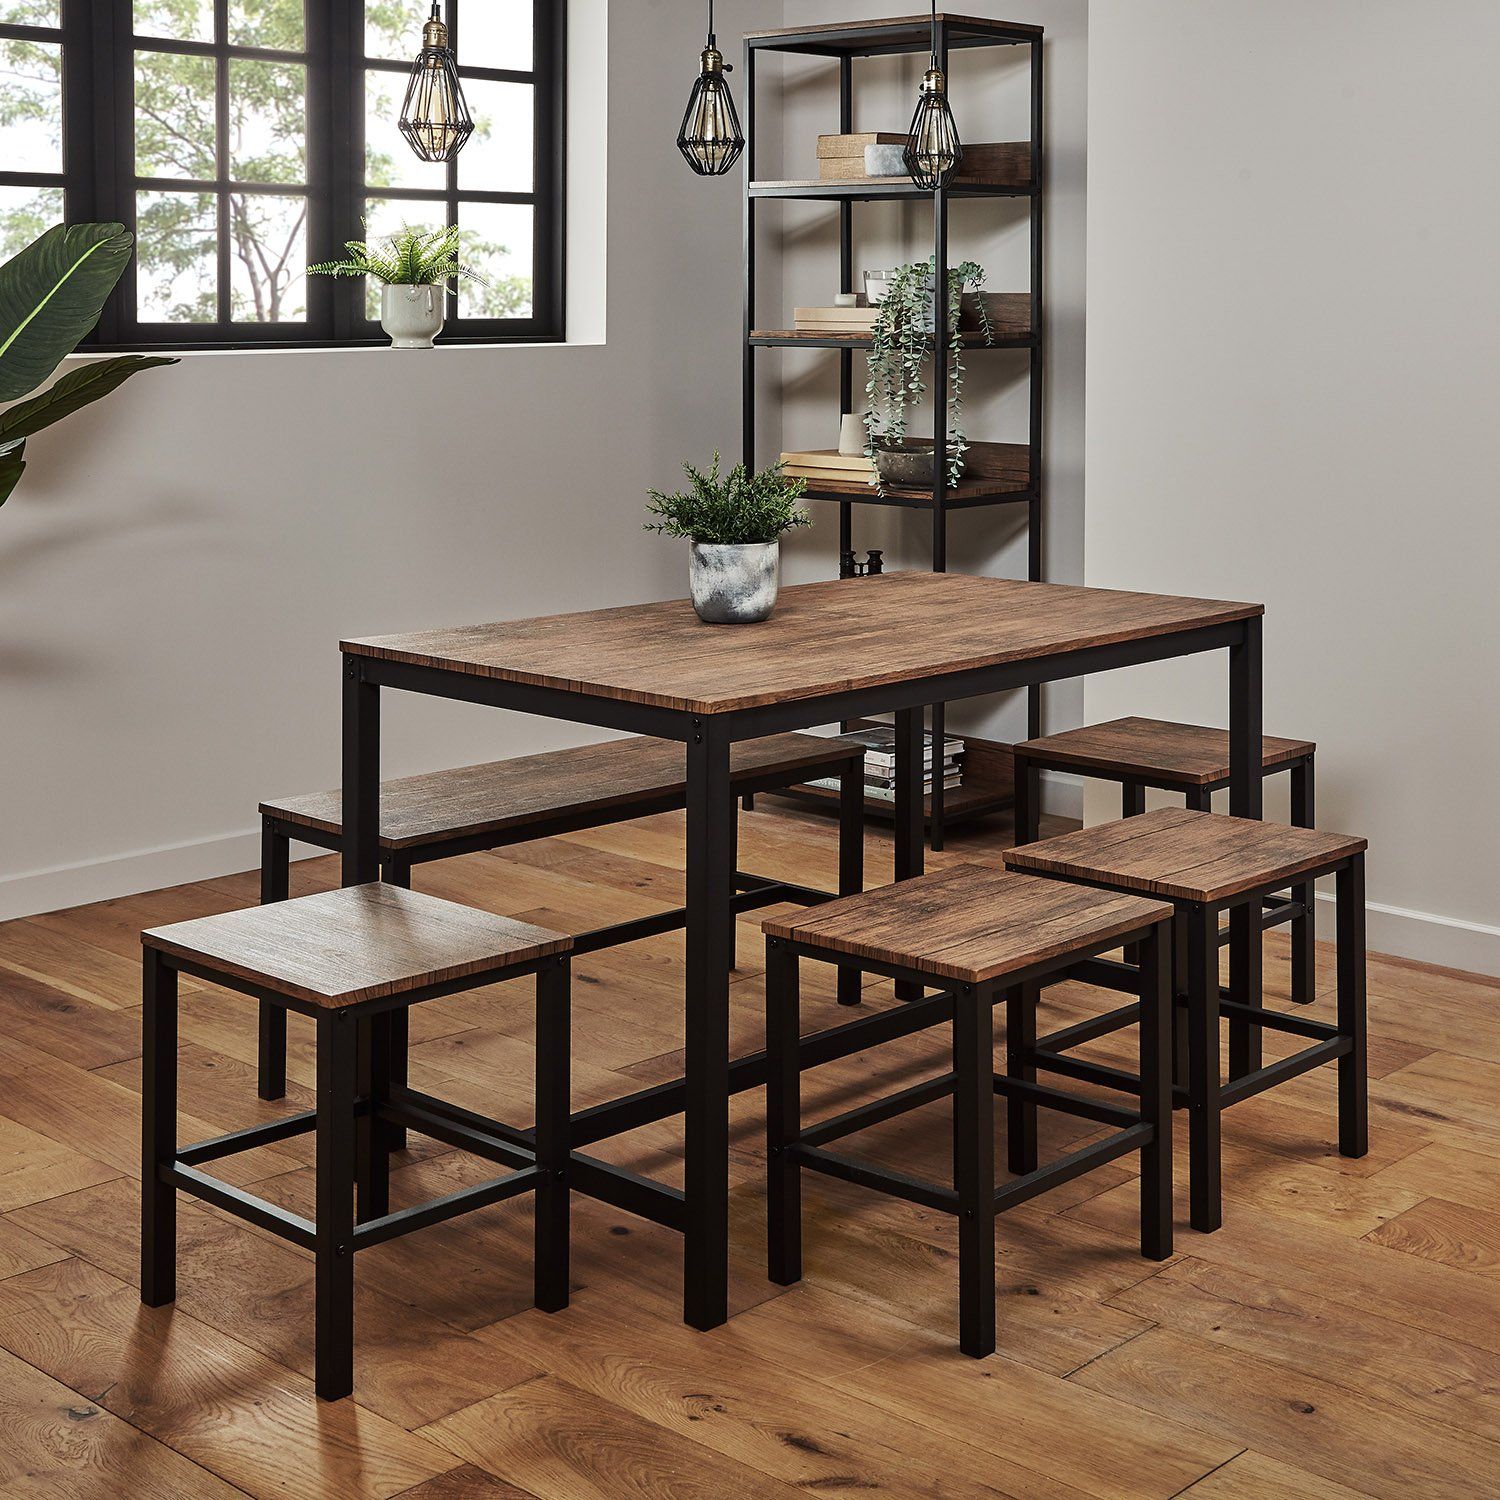 Sheffield dining table set – 6 seater – 1 bench – 4 stools - Laura James